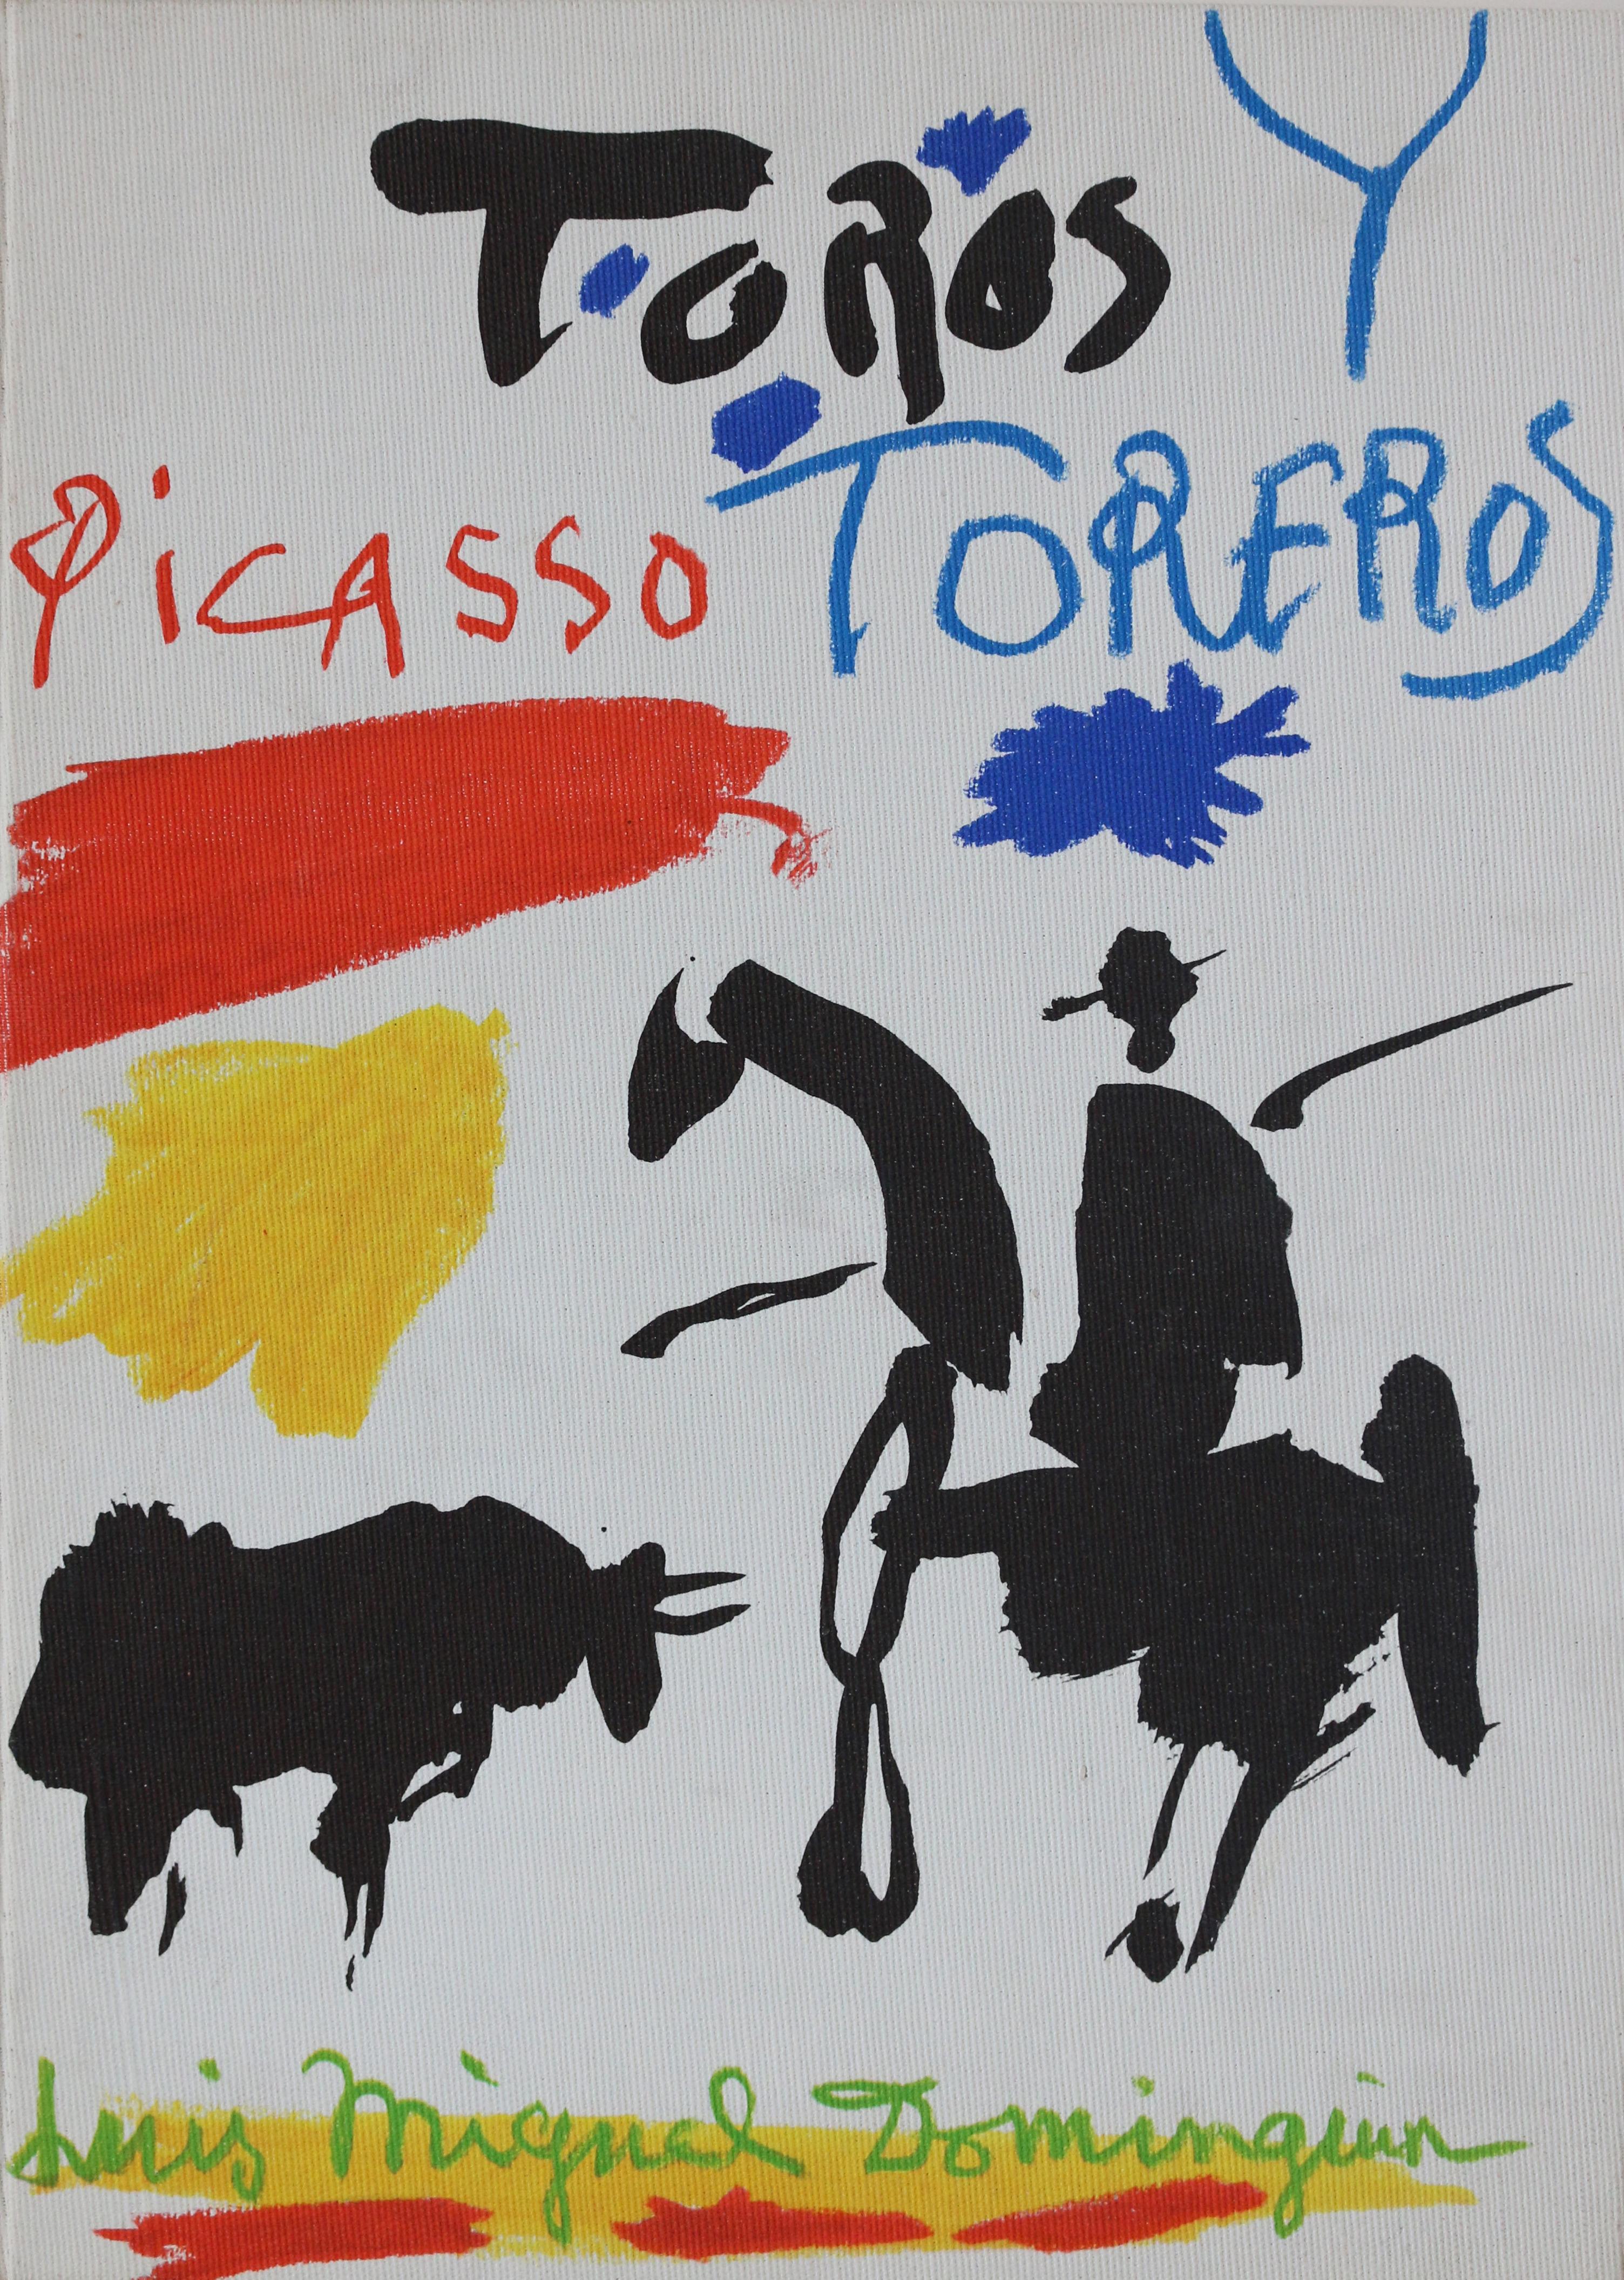 Toros y Toreros (first edition) - Art by (after) Pablo Picasso